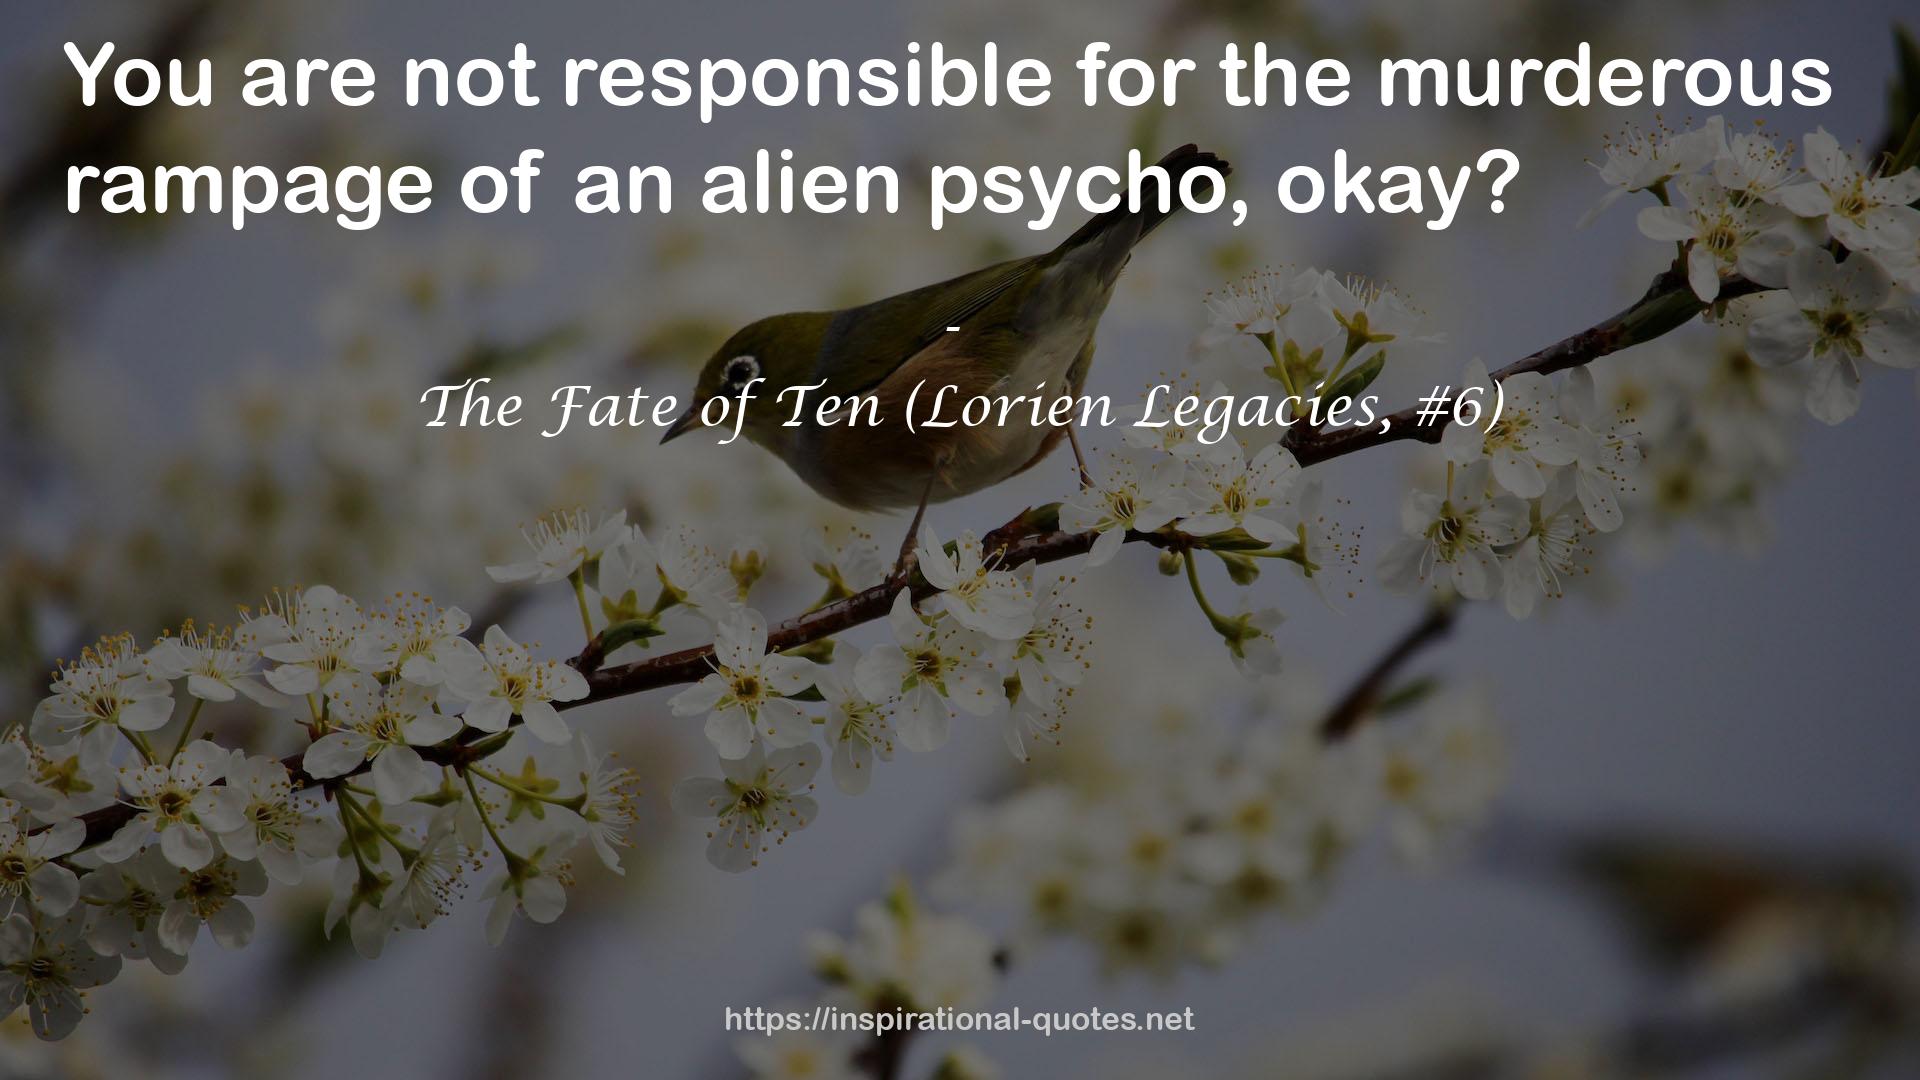 The Fate of Ten (Lorien Legacies, #6) QUOTES